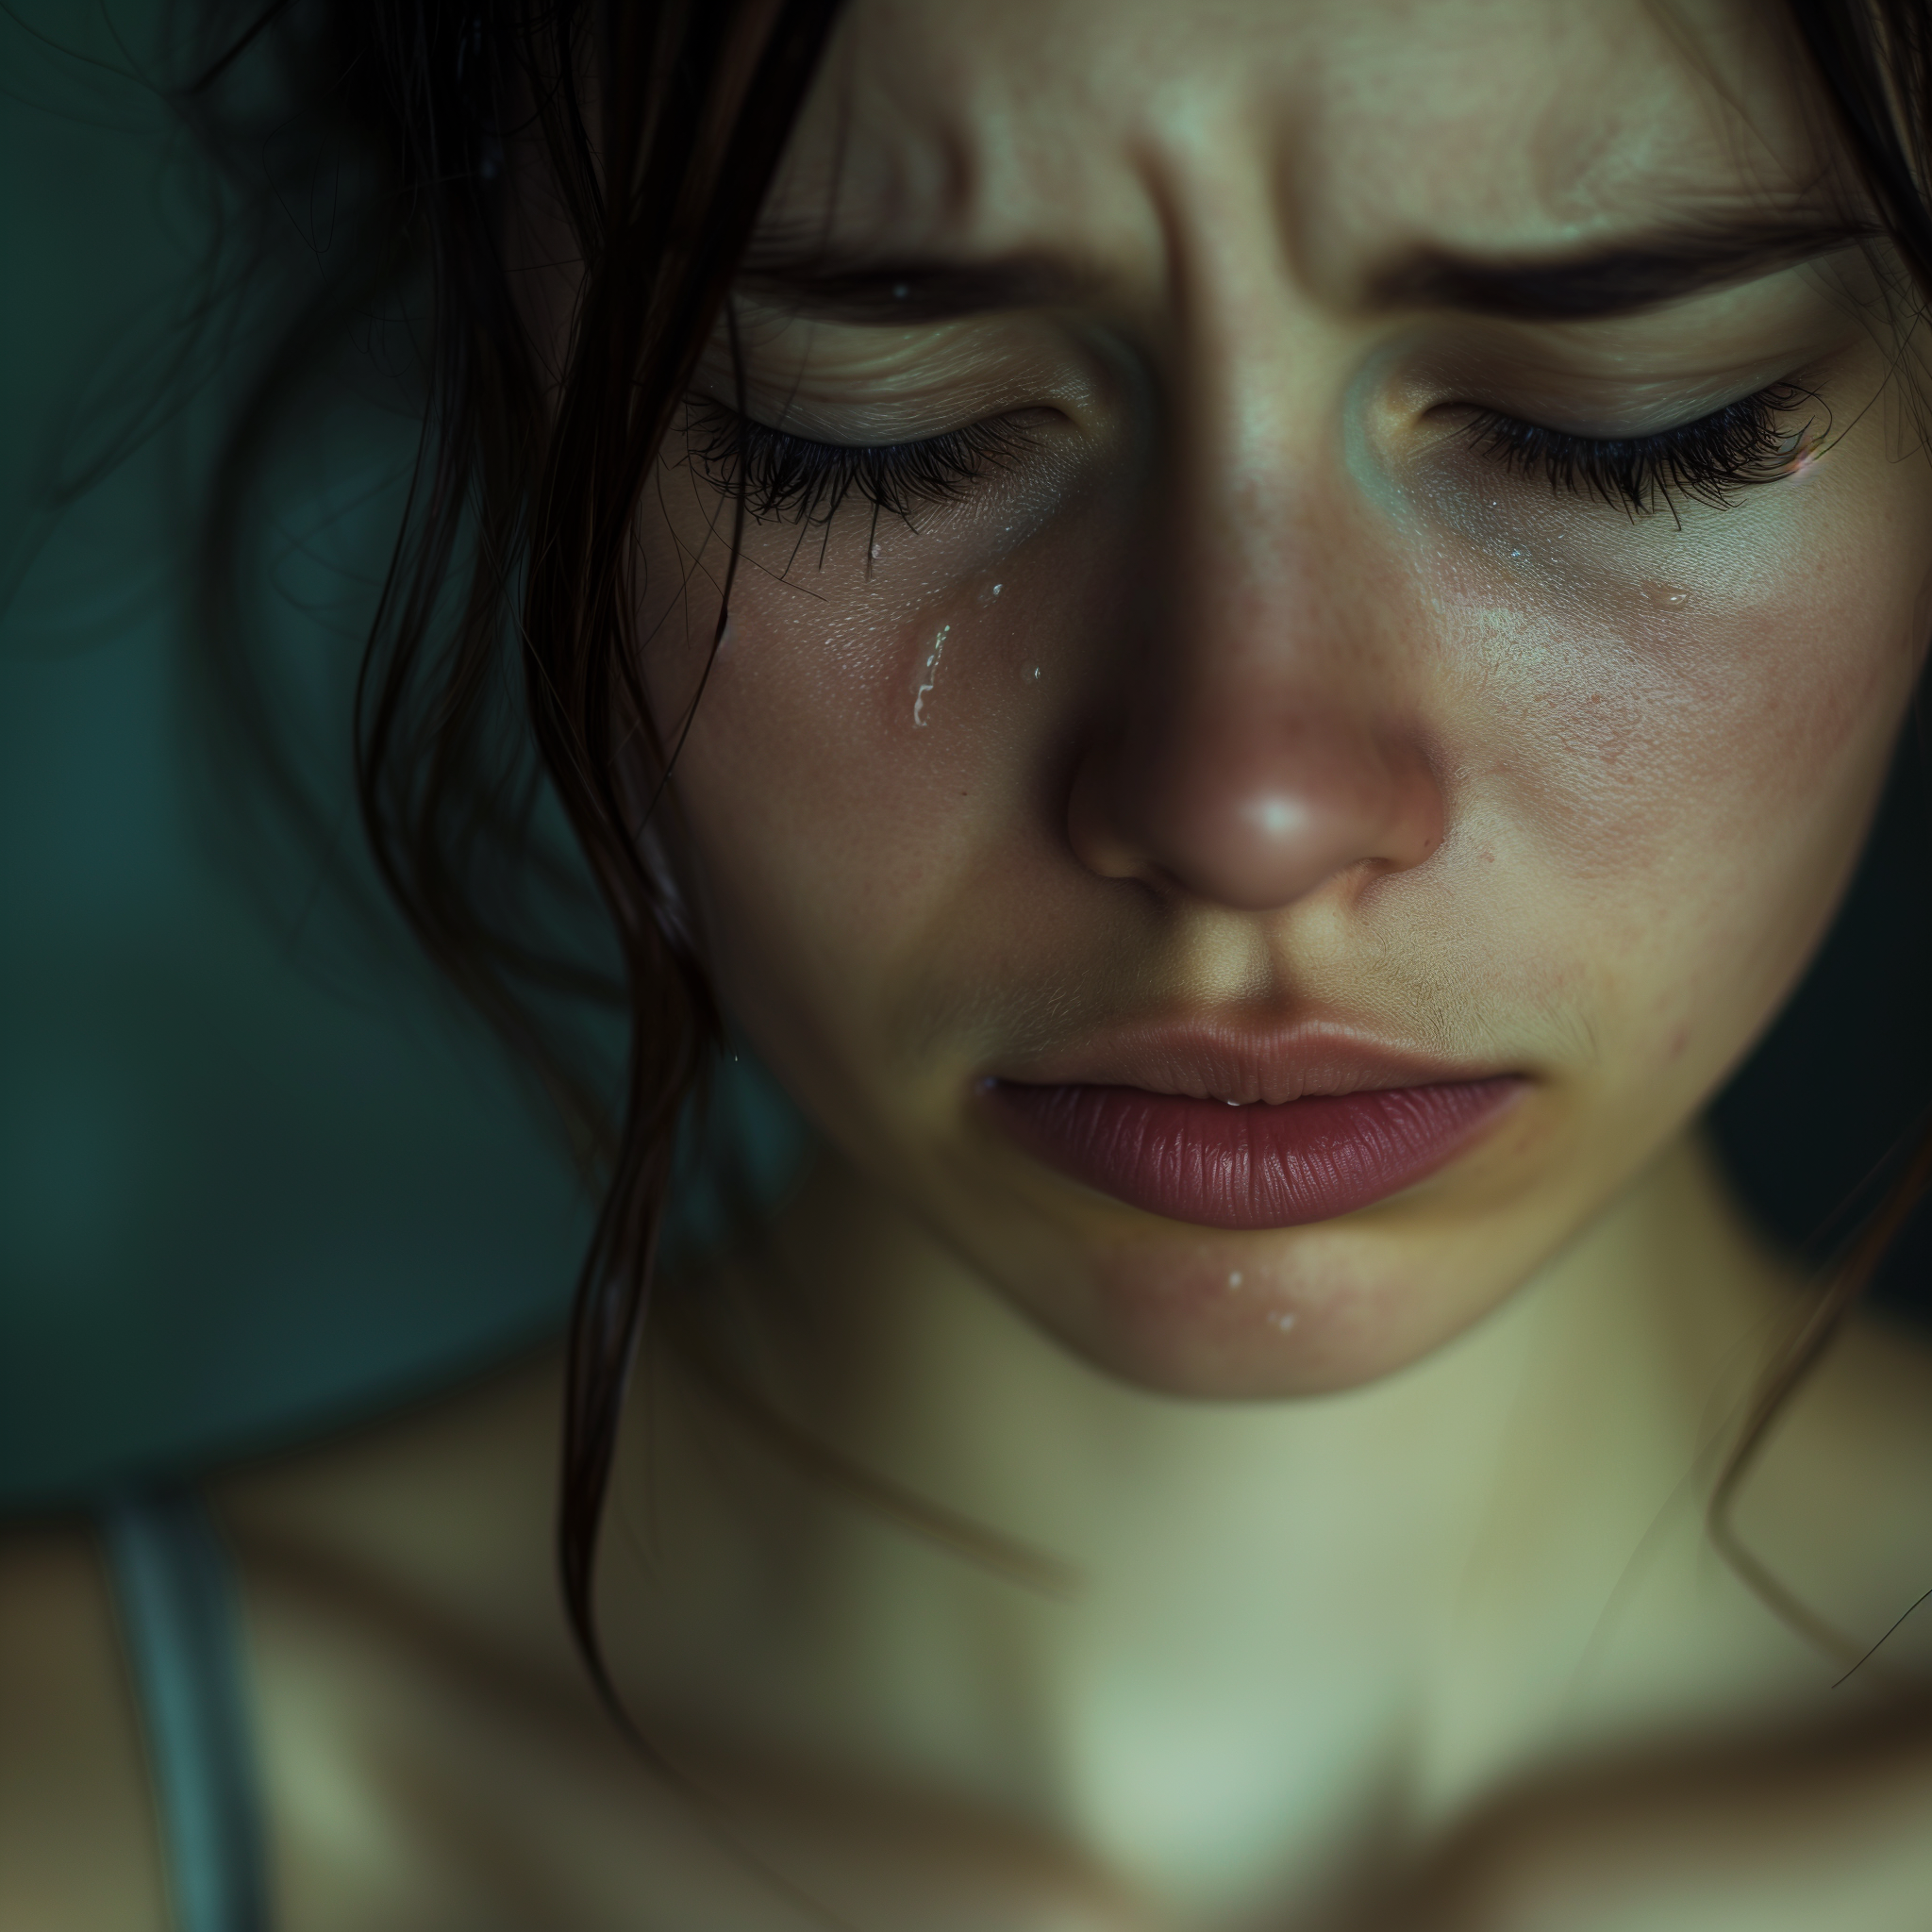 A crying woman | Source: Midjourney